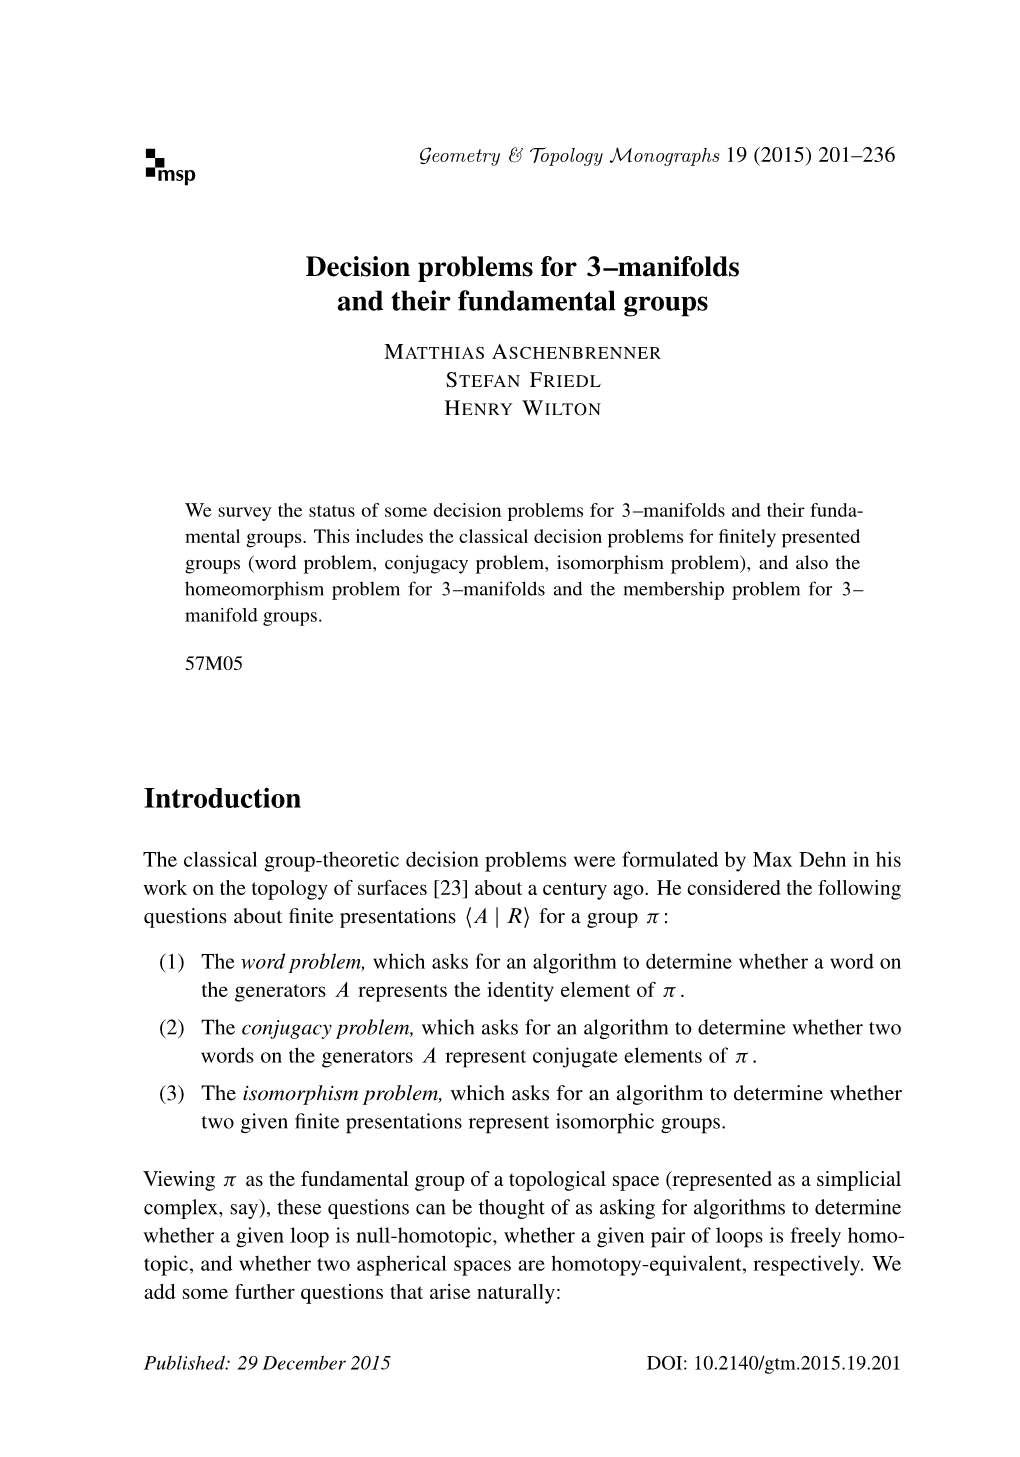 Decision Problems for 3–Manifolds and Their Fundamental Groups